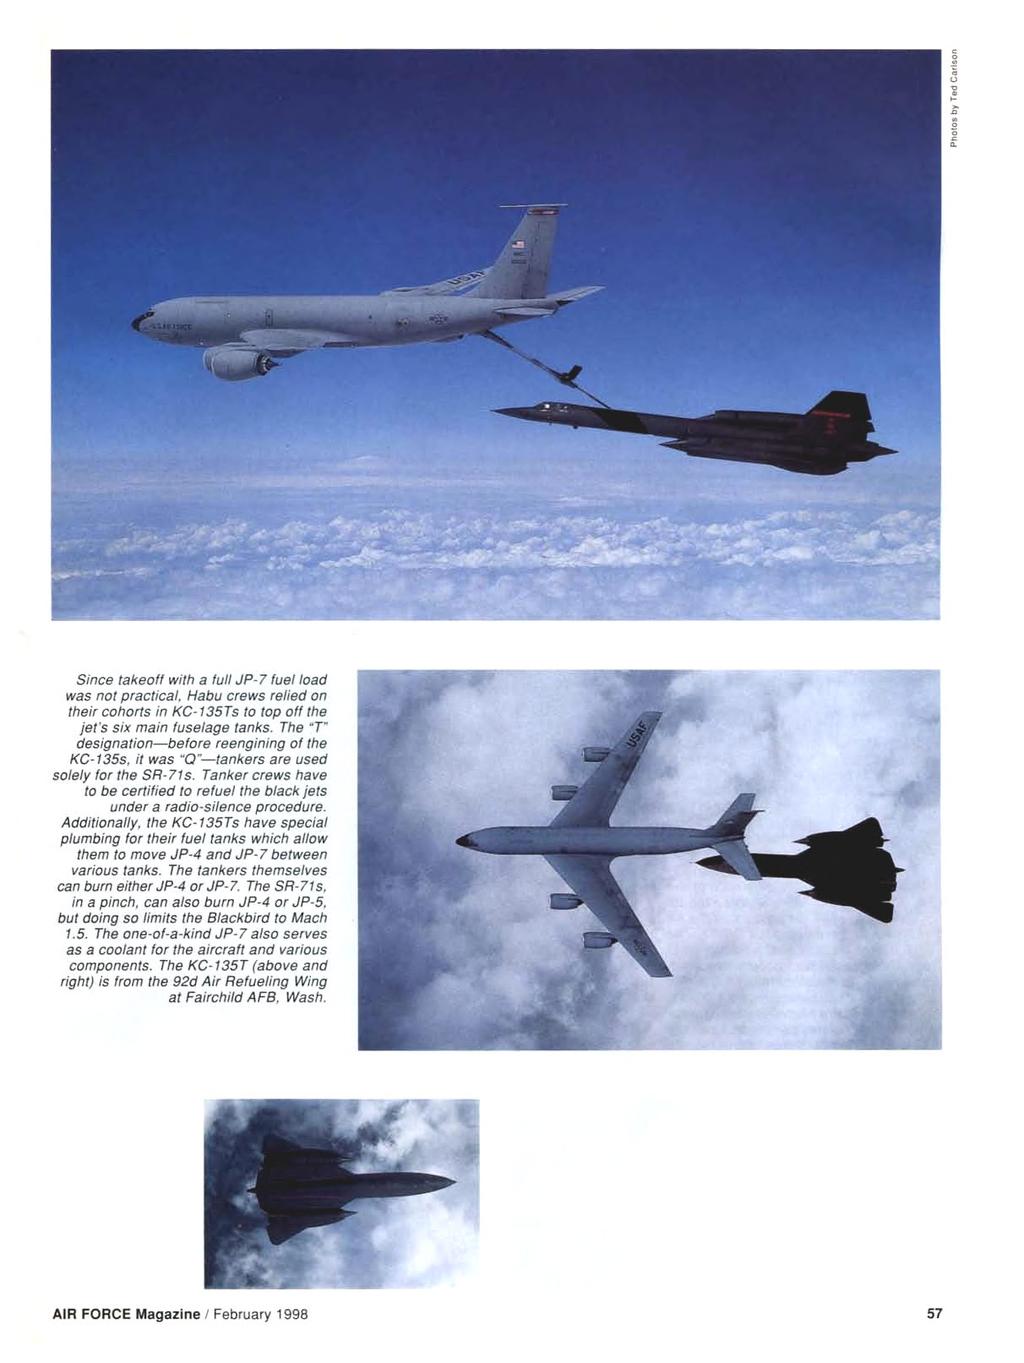 Mir 21Is Since takeoff with a full JP-7 fuel load was not practical, Habu crews relied on their cohorts in KC-135Ts to top off the jet's six main fuselage tanks.